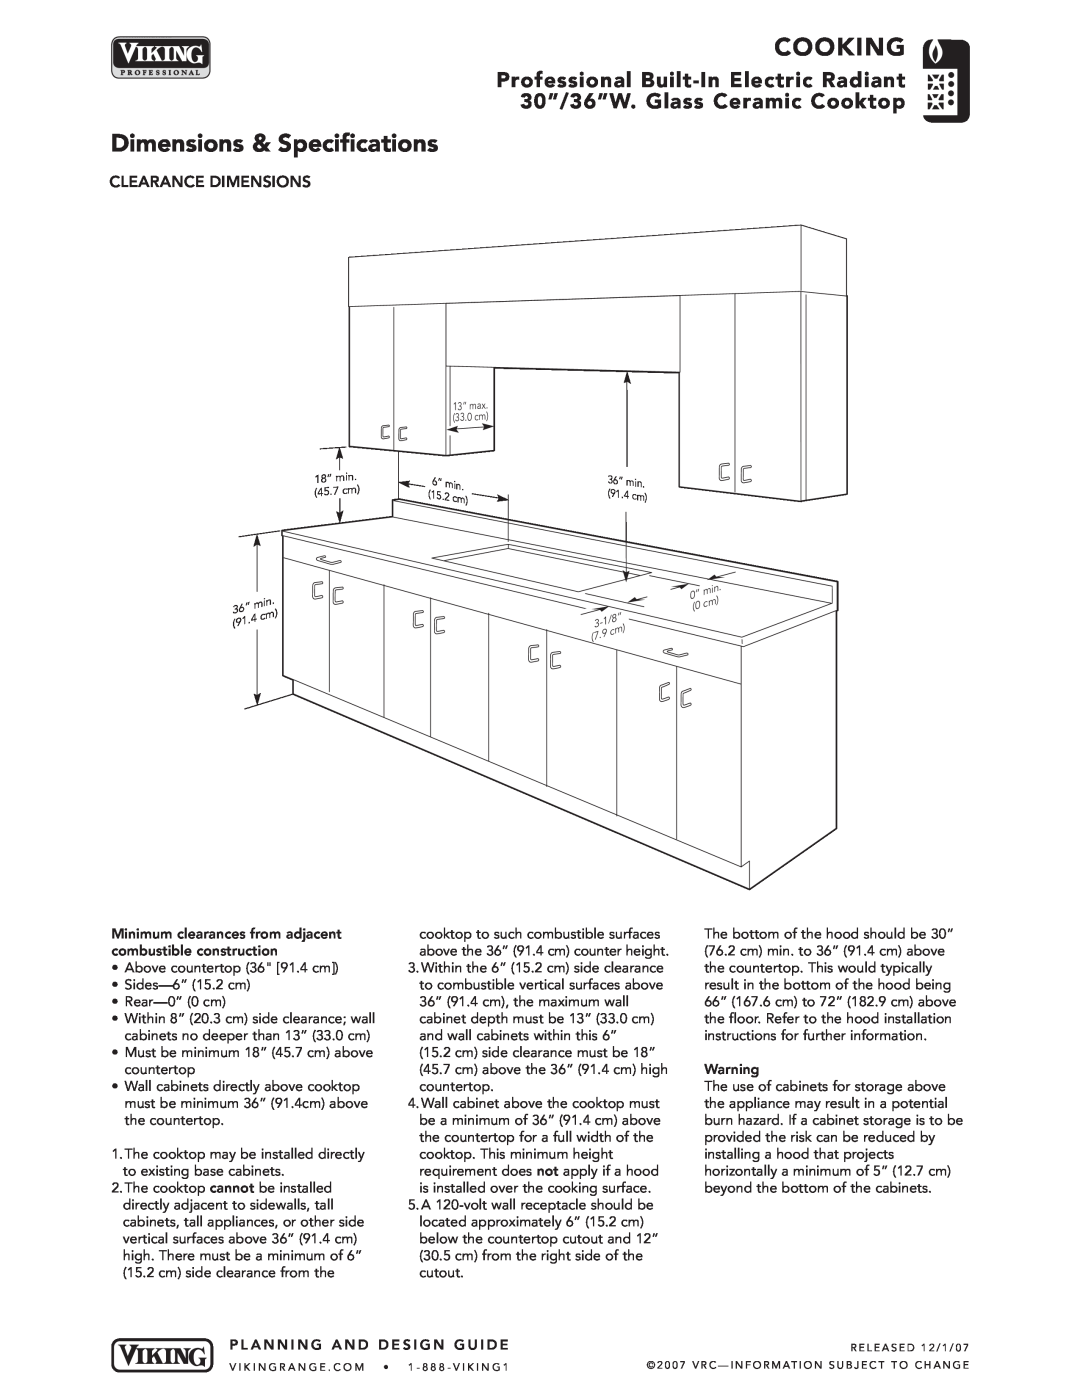 Viking VECU manual Clearance Dimensions, Cooking, Dimensions & Specifications 